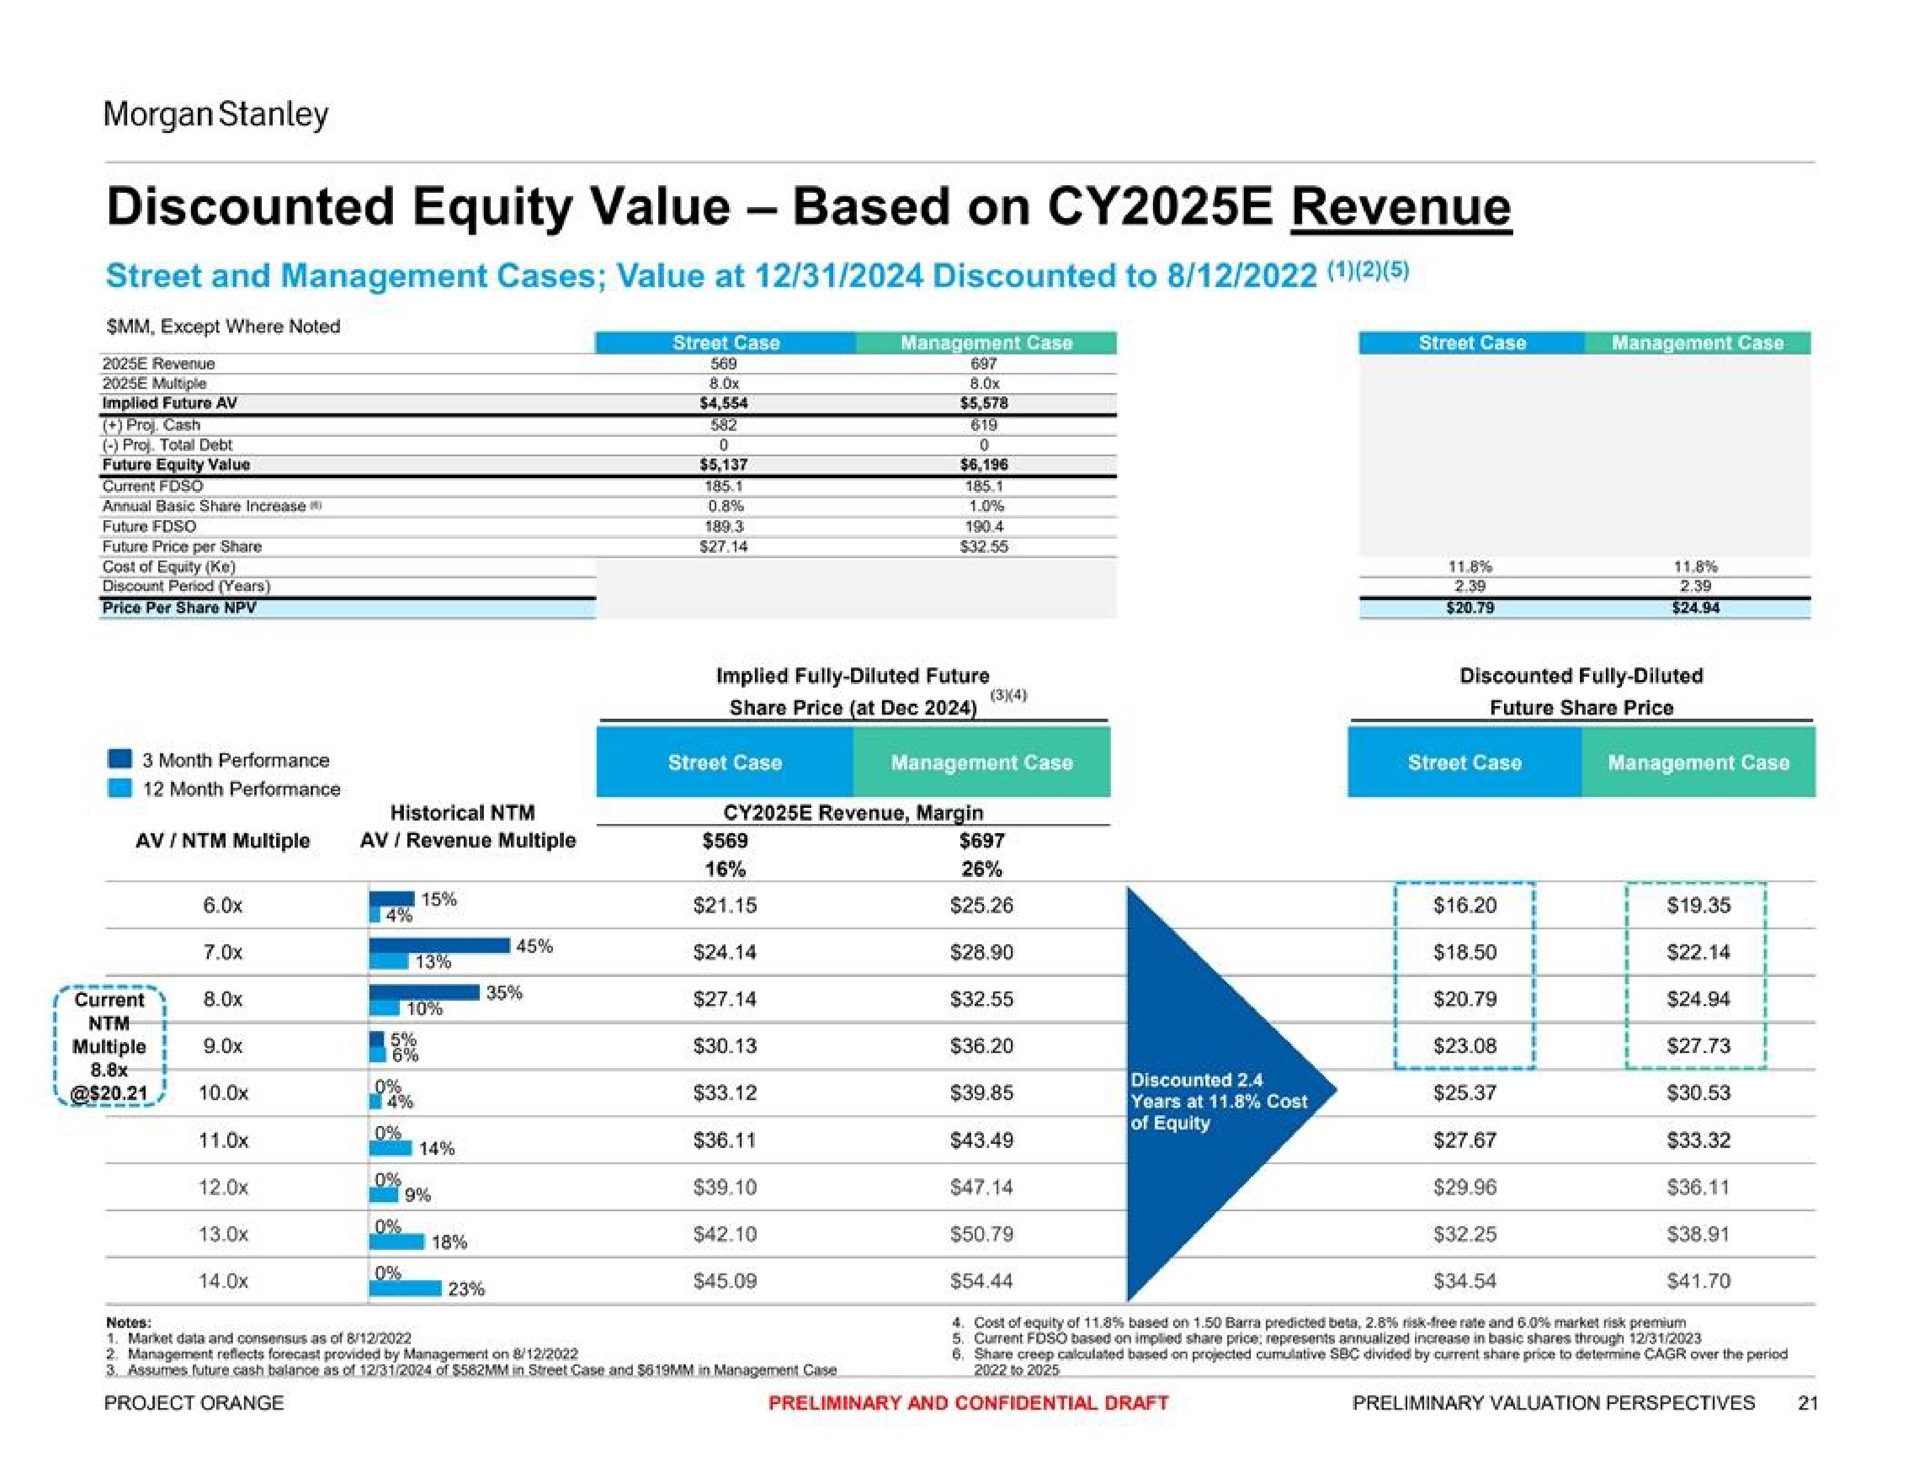 discounted equity value based on revenue | Morgan Stanley